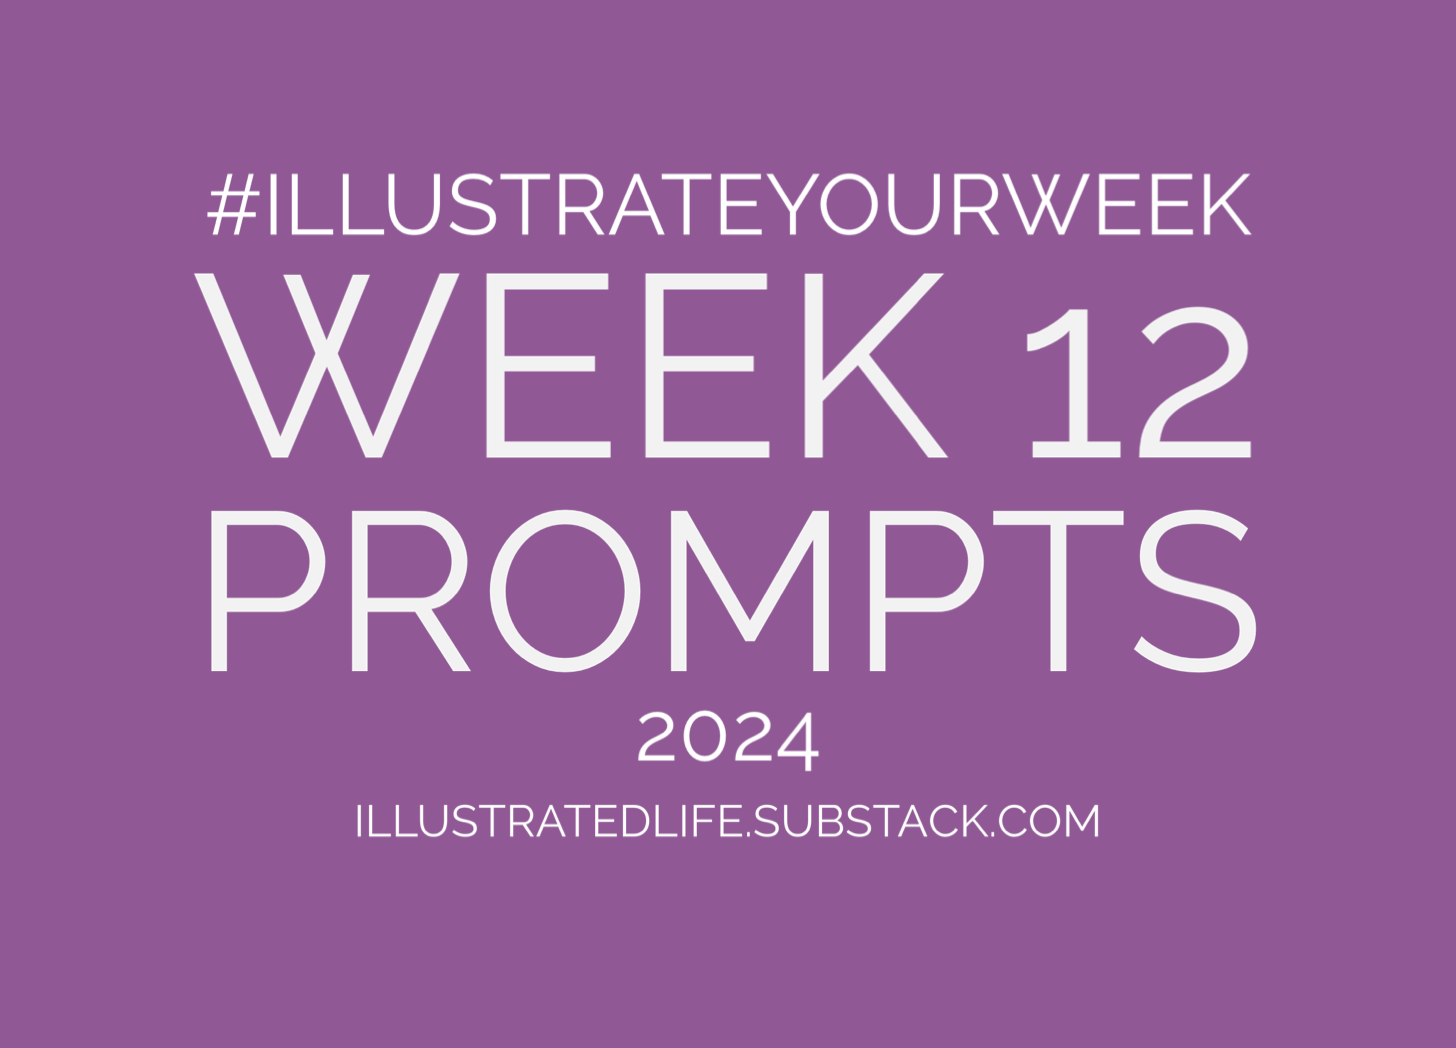 Week 12 Prompts for Illustrate Your Week 2024